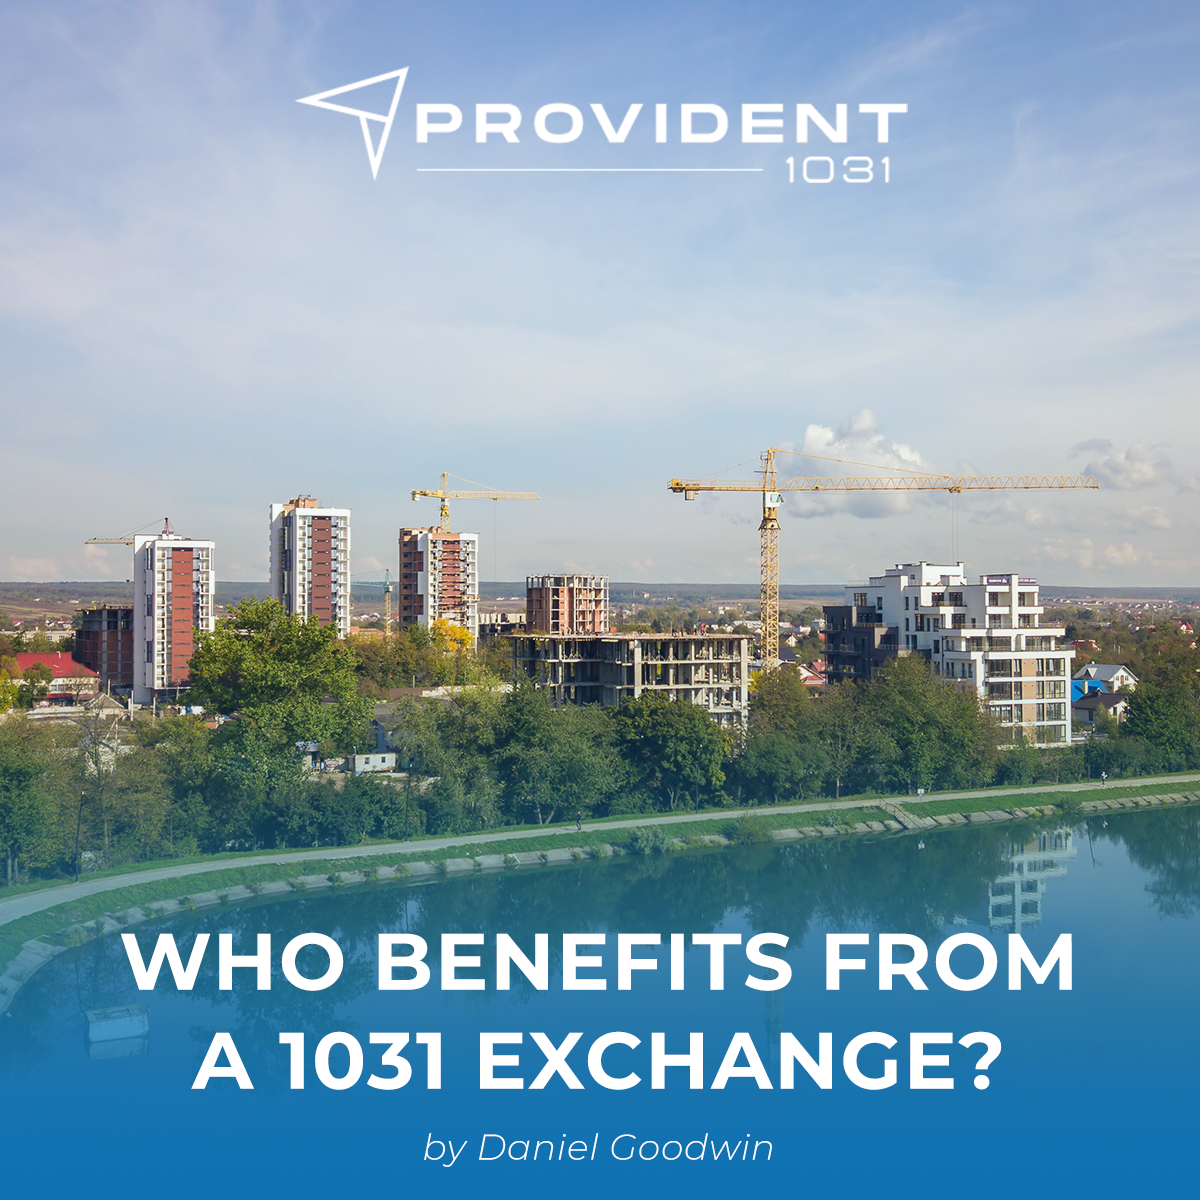 Who Benefits from A 1031 Exchange?